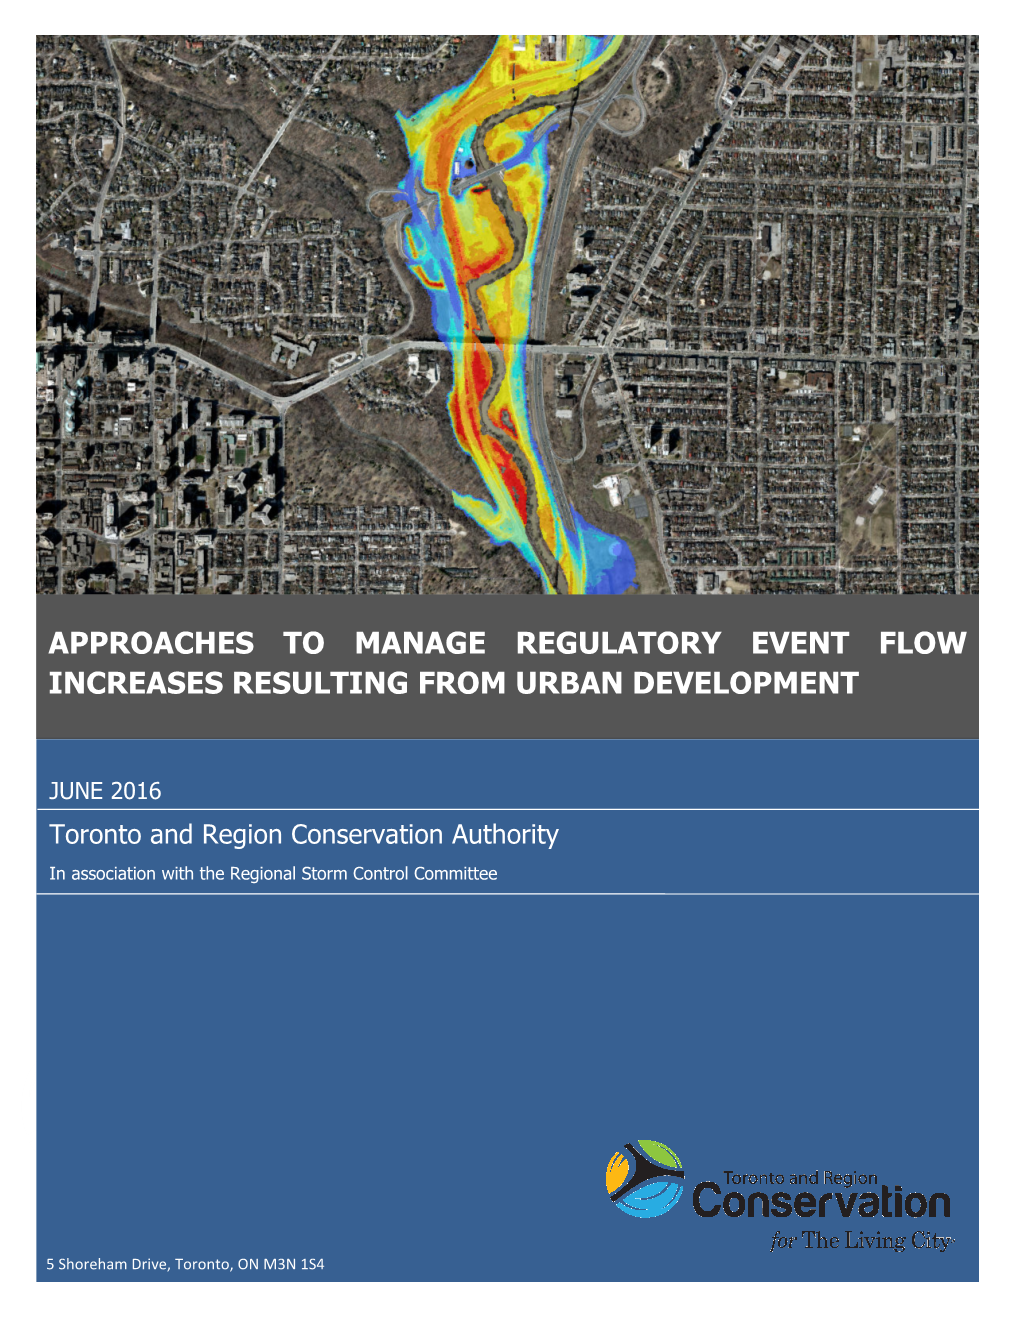 Approaches to Manage Regulatory Event Flow Increases Resulting from Urban Development